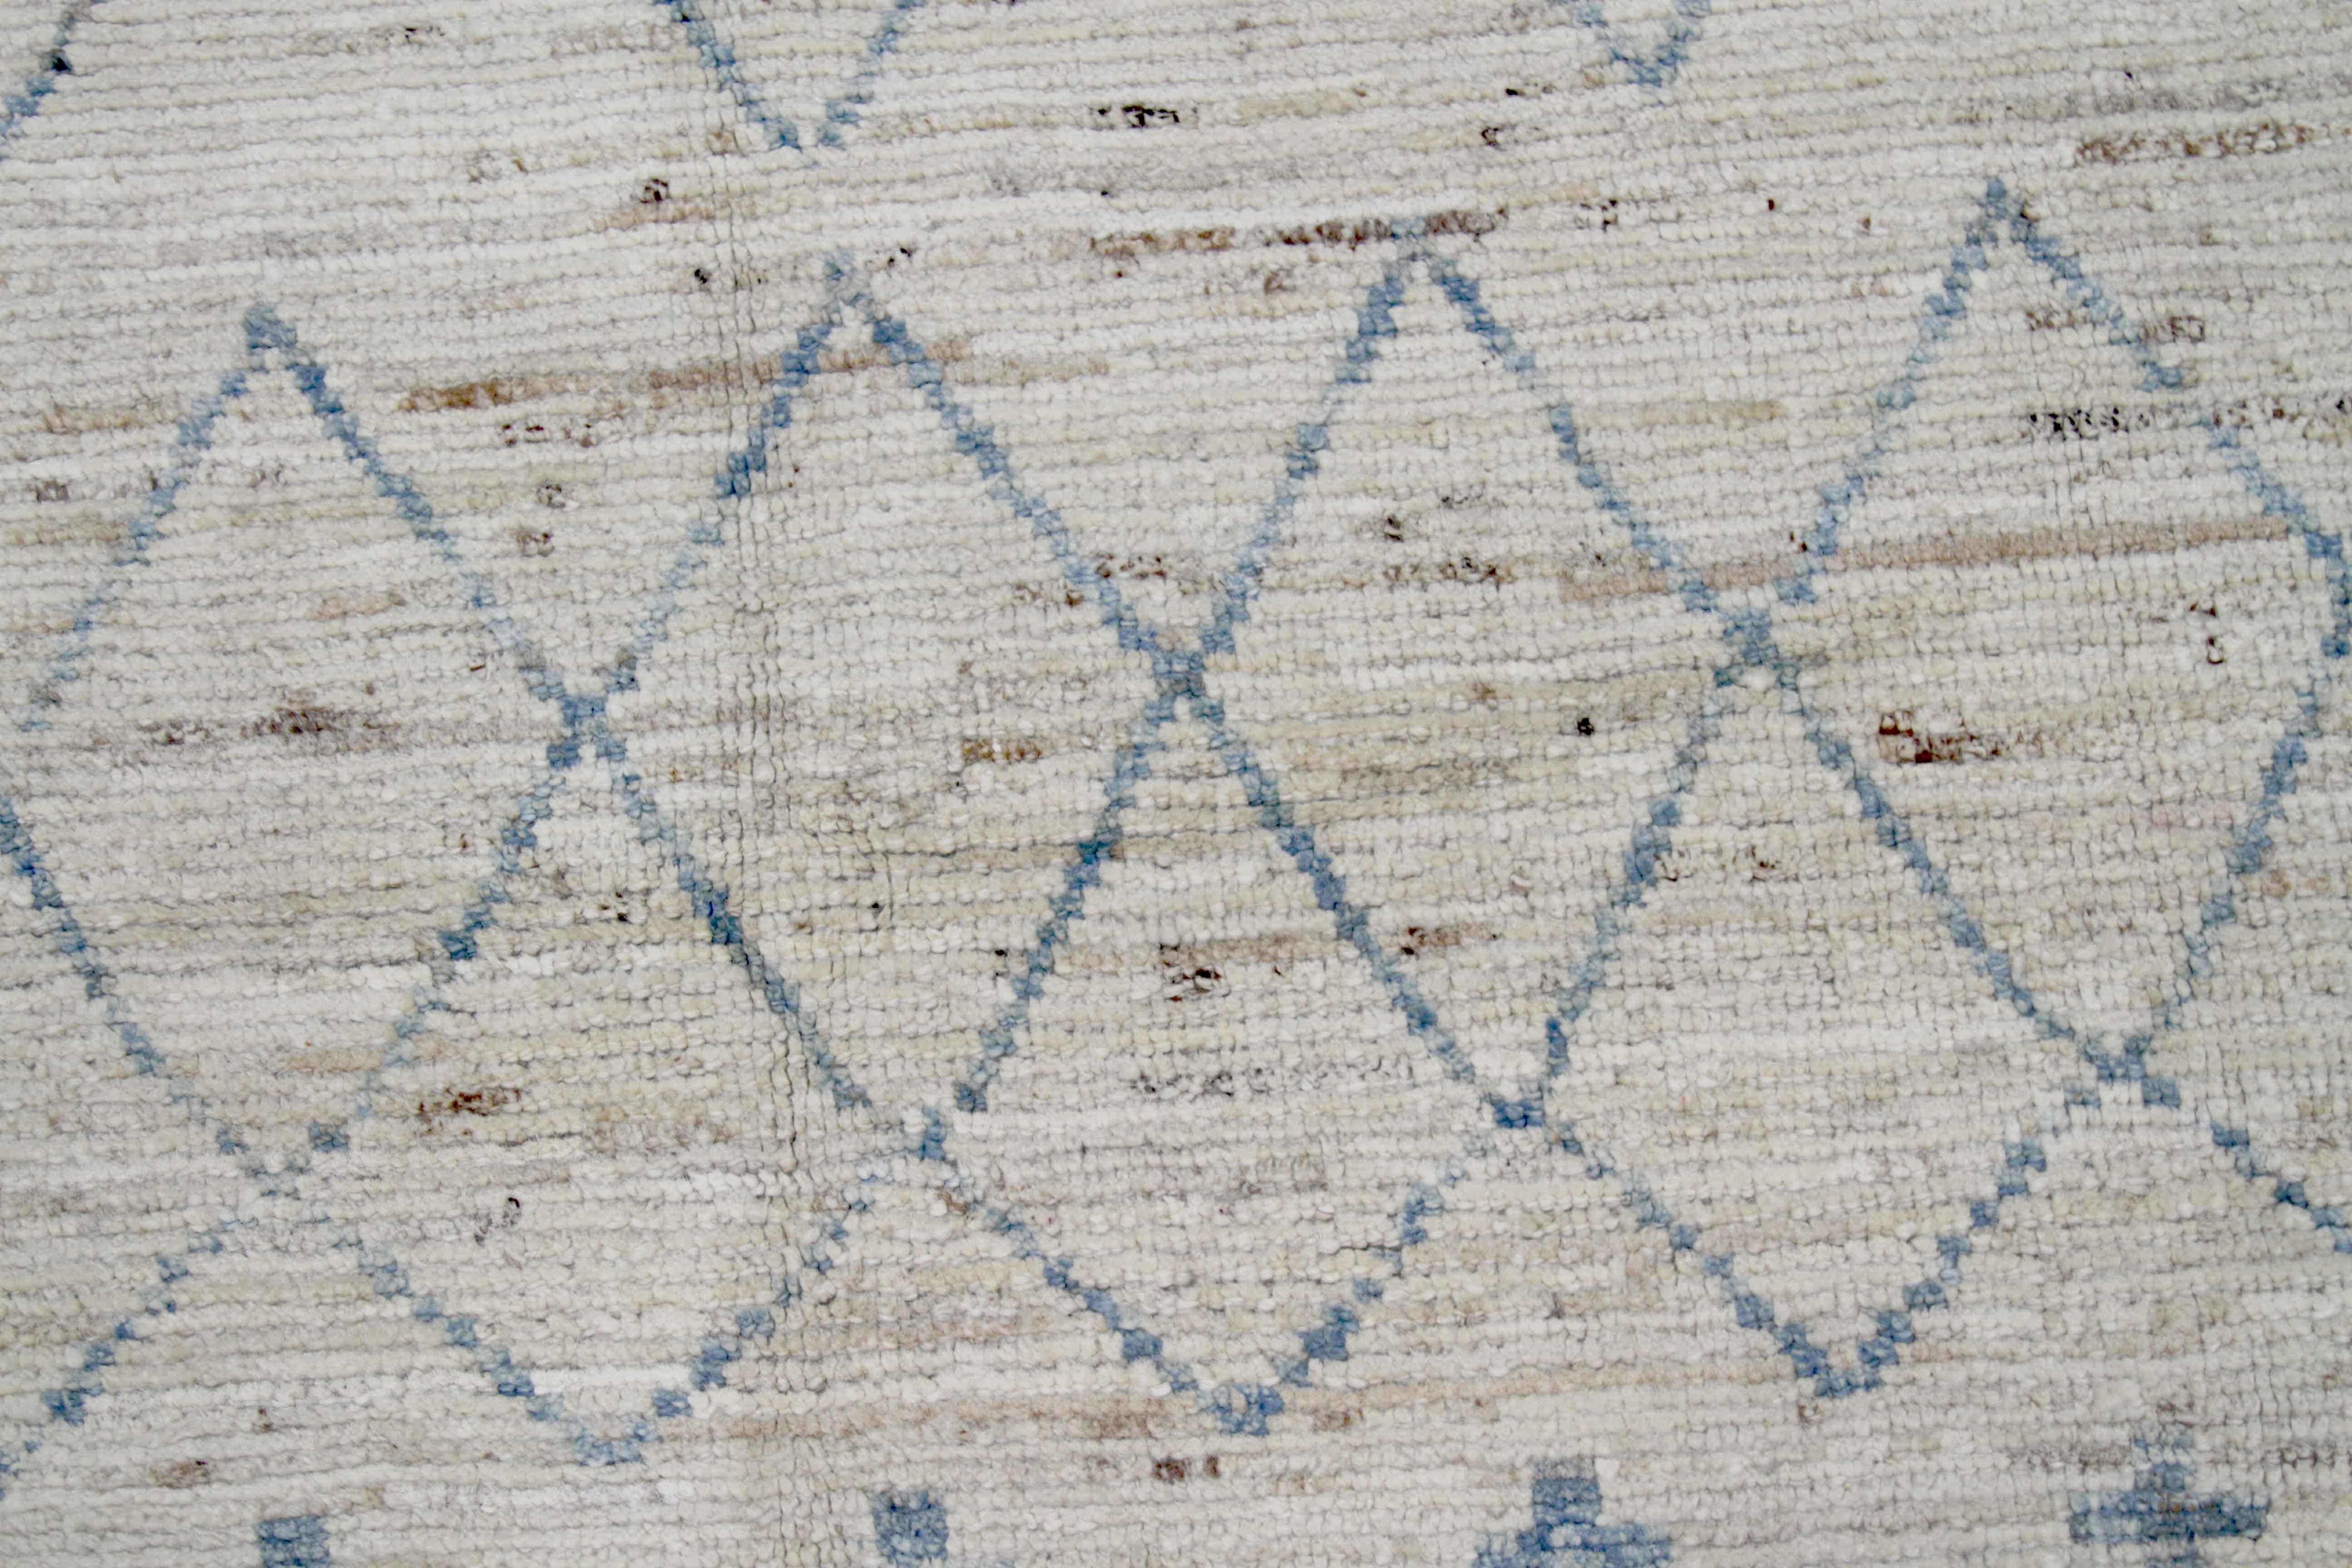 Hand-Woven Afghan Moroccan Style Rug with Blue Tribal Patterns on Ivory Field